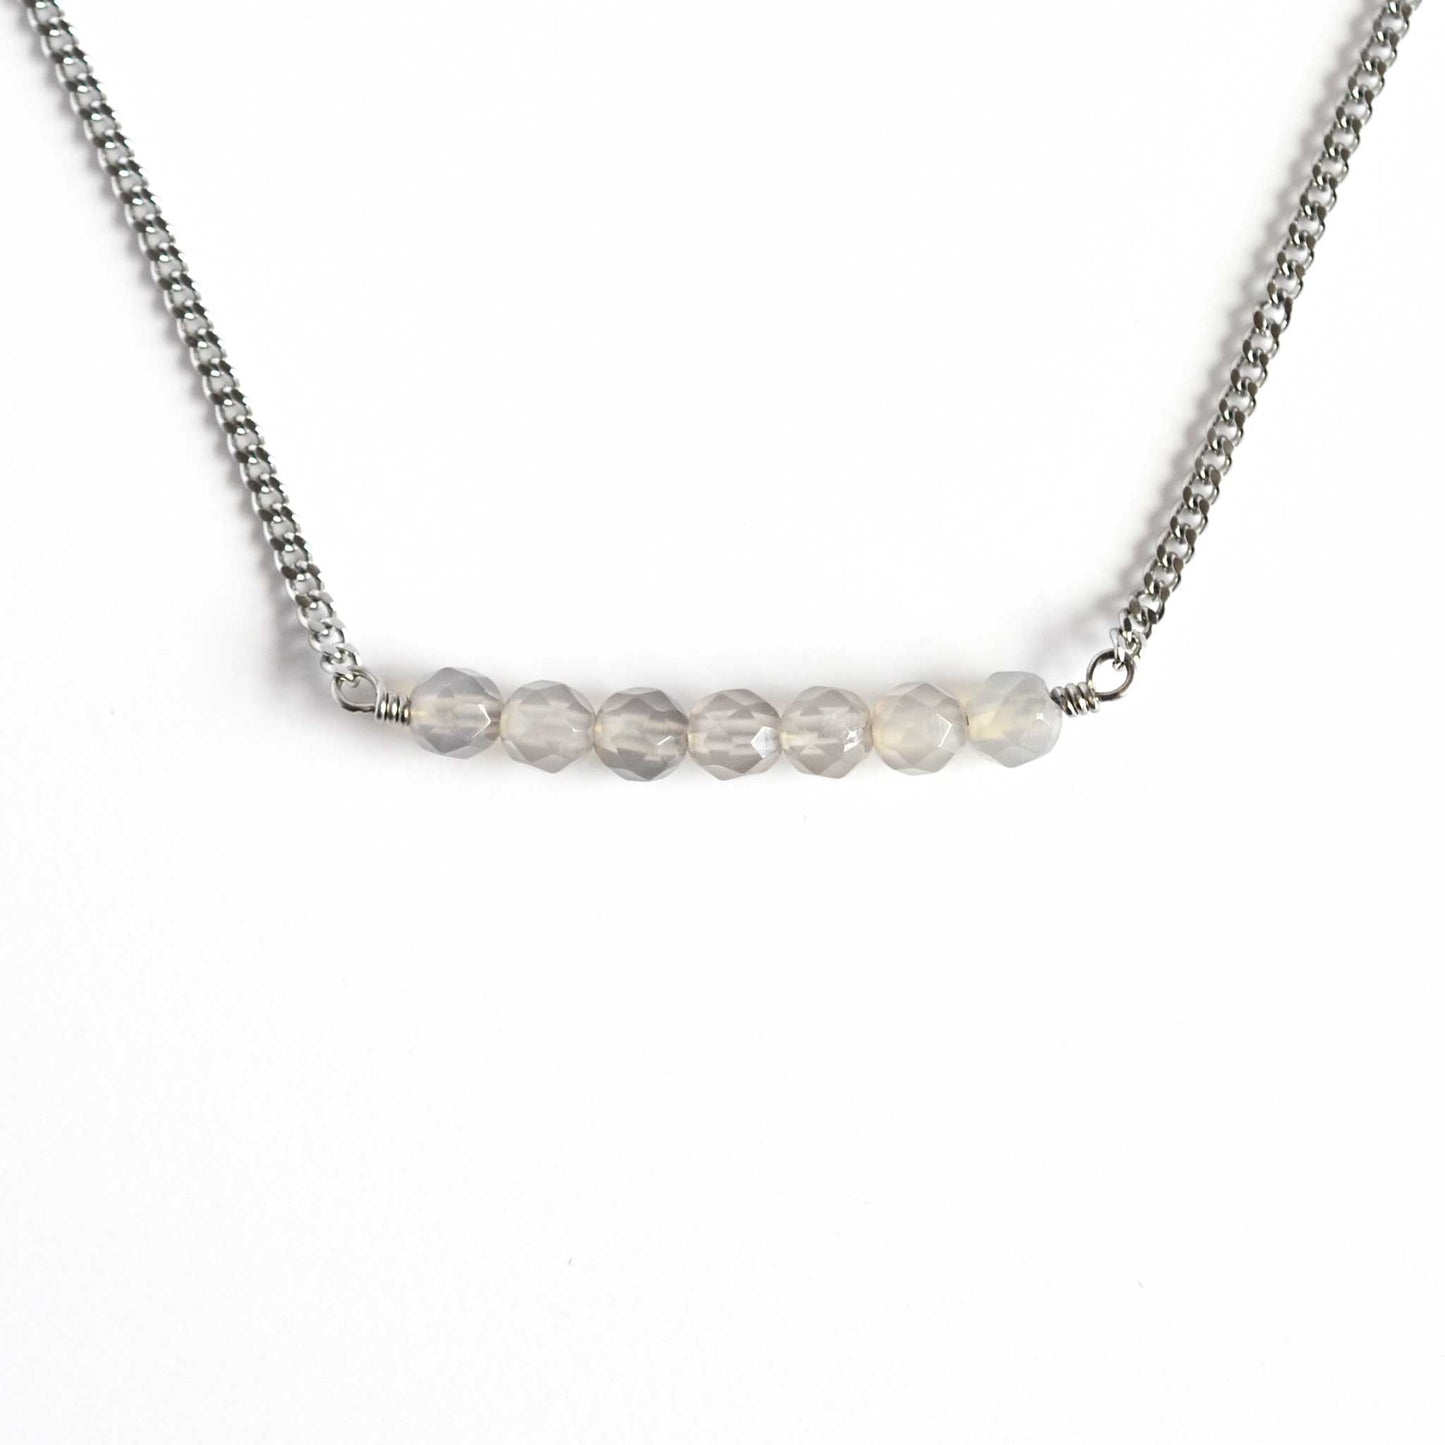 Grey Agate necklace with stainless steel chain on white background